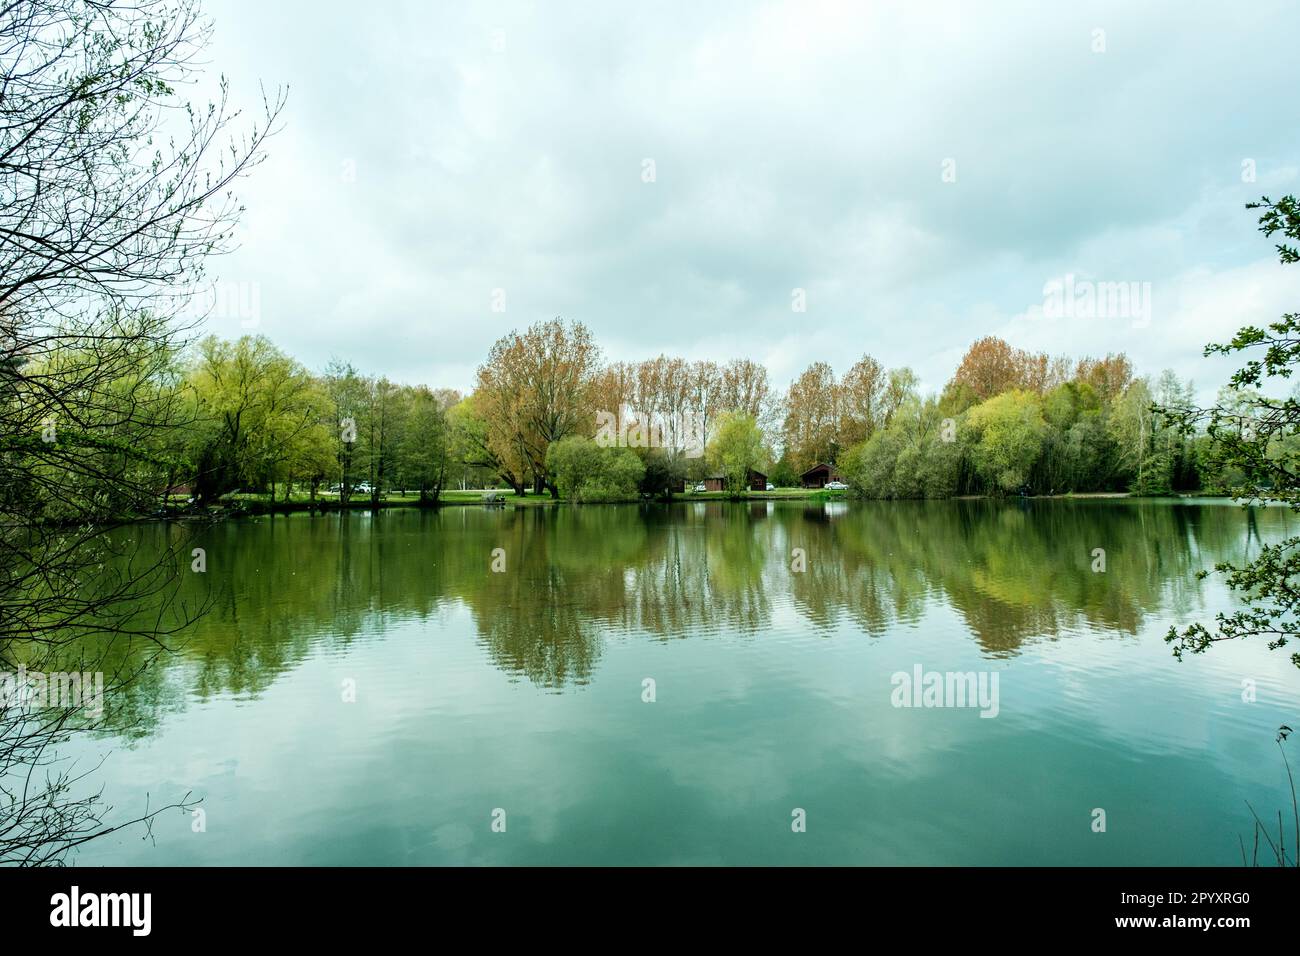 Fishing Lake Surrounded By Trees Reflected In The Calm Water Under A Grey Cloudy Sky Stock Photo